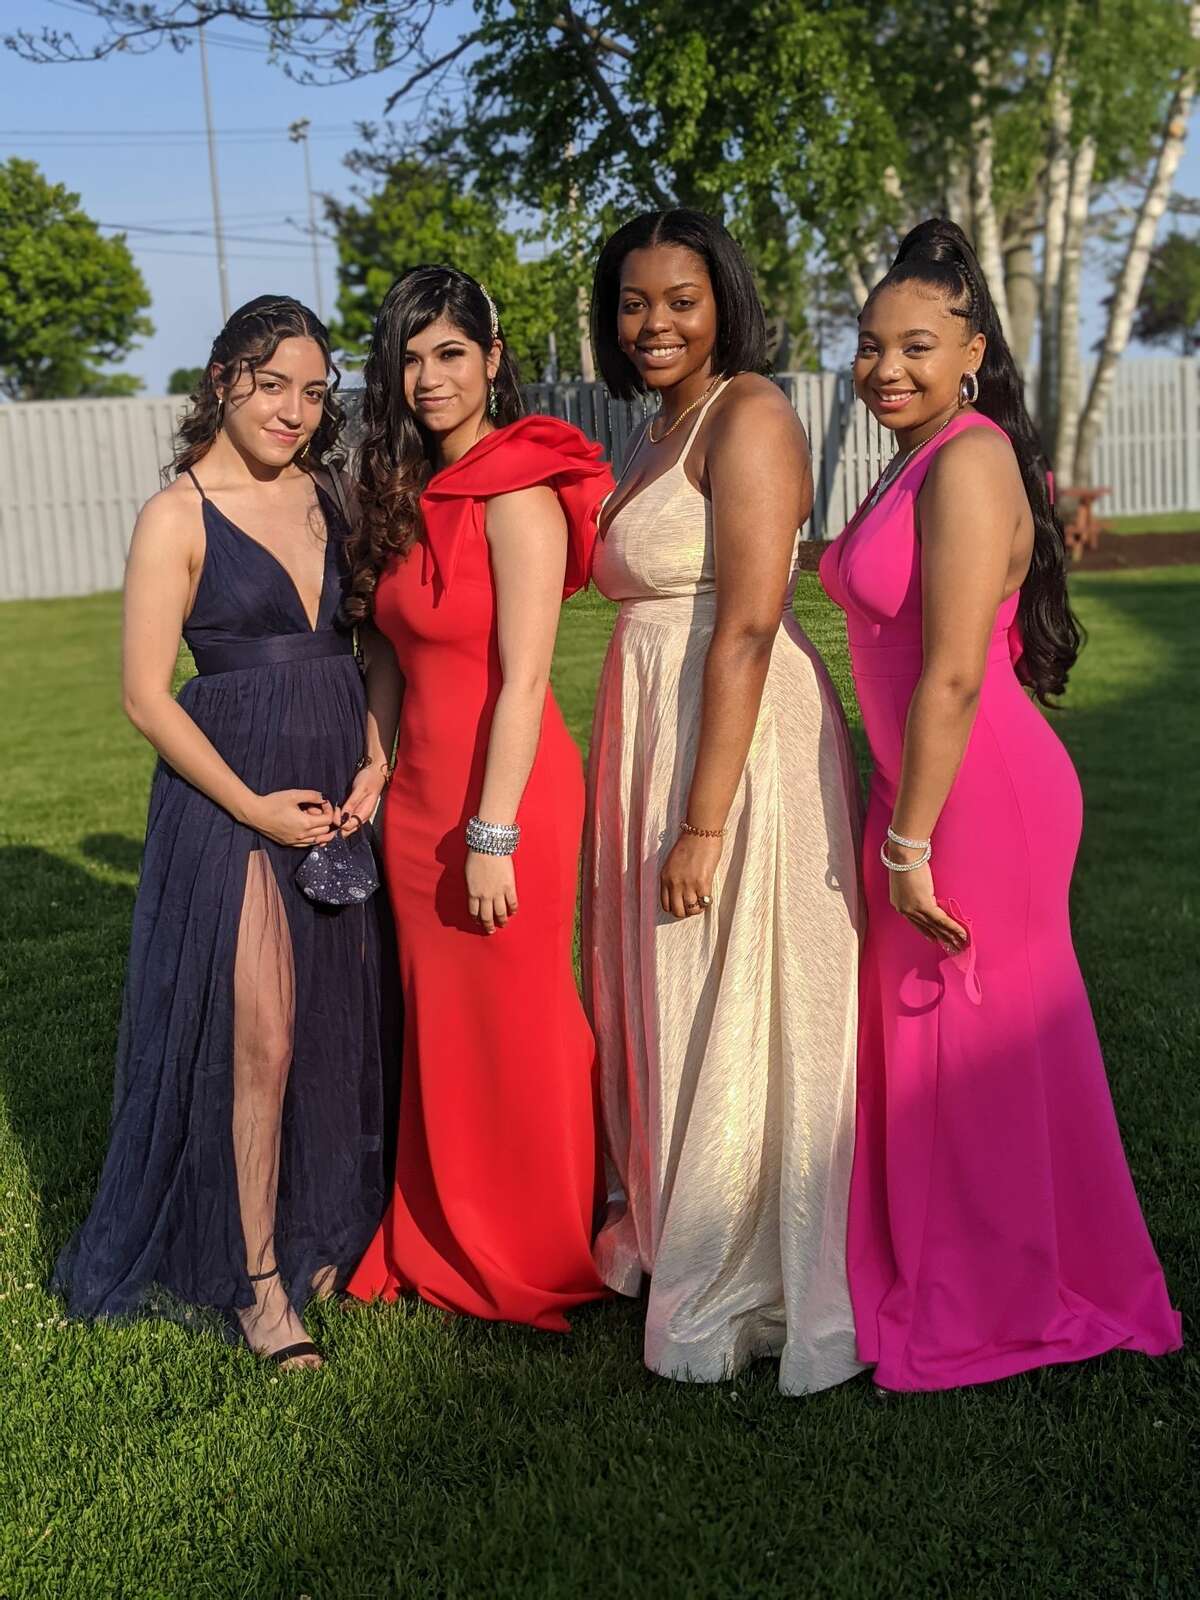 The Norwalk High School and P-TECH prom was held at the Longshore Pavilion at Norwalk Cove on May 21, 2021. Were you SEEN?